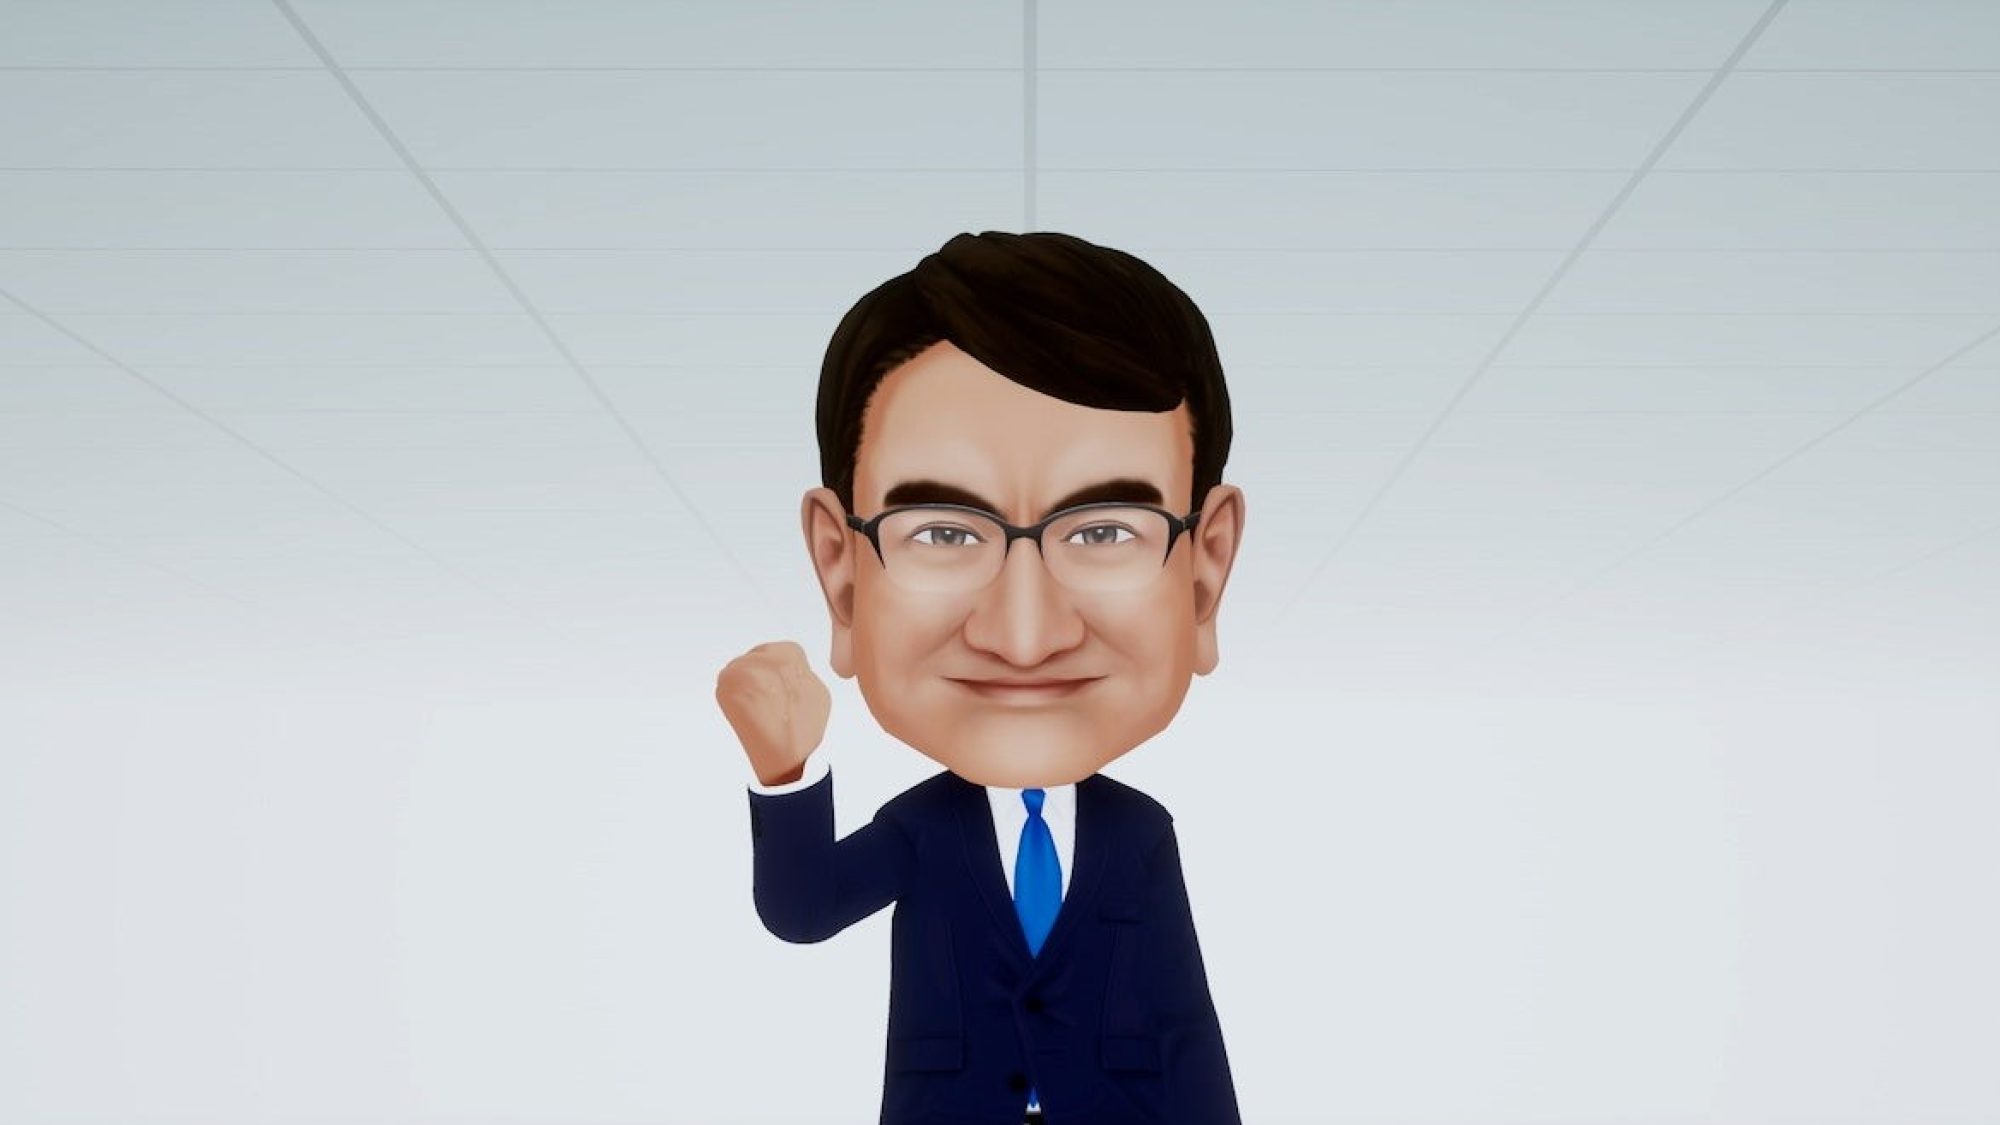 Avatar image of KONO Taro, waving in a business suit.